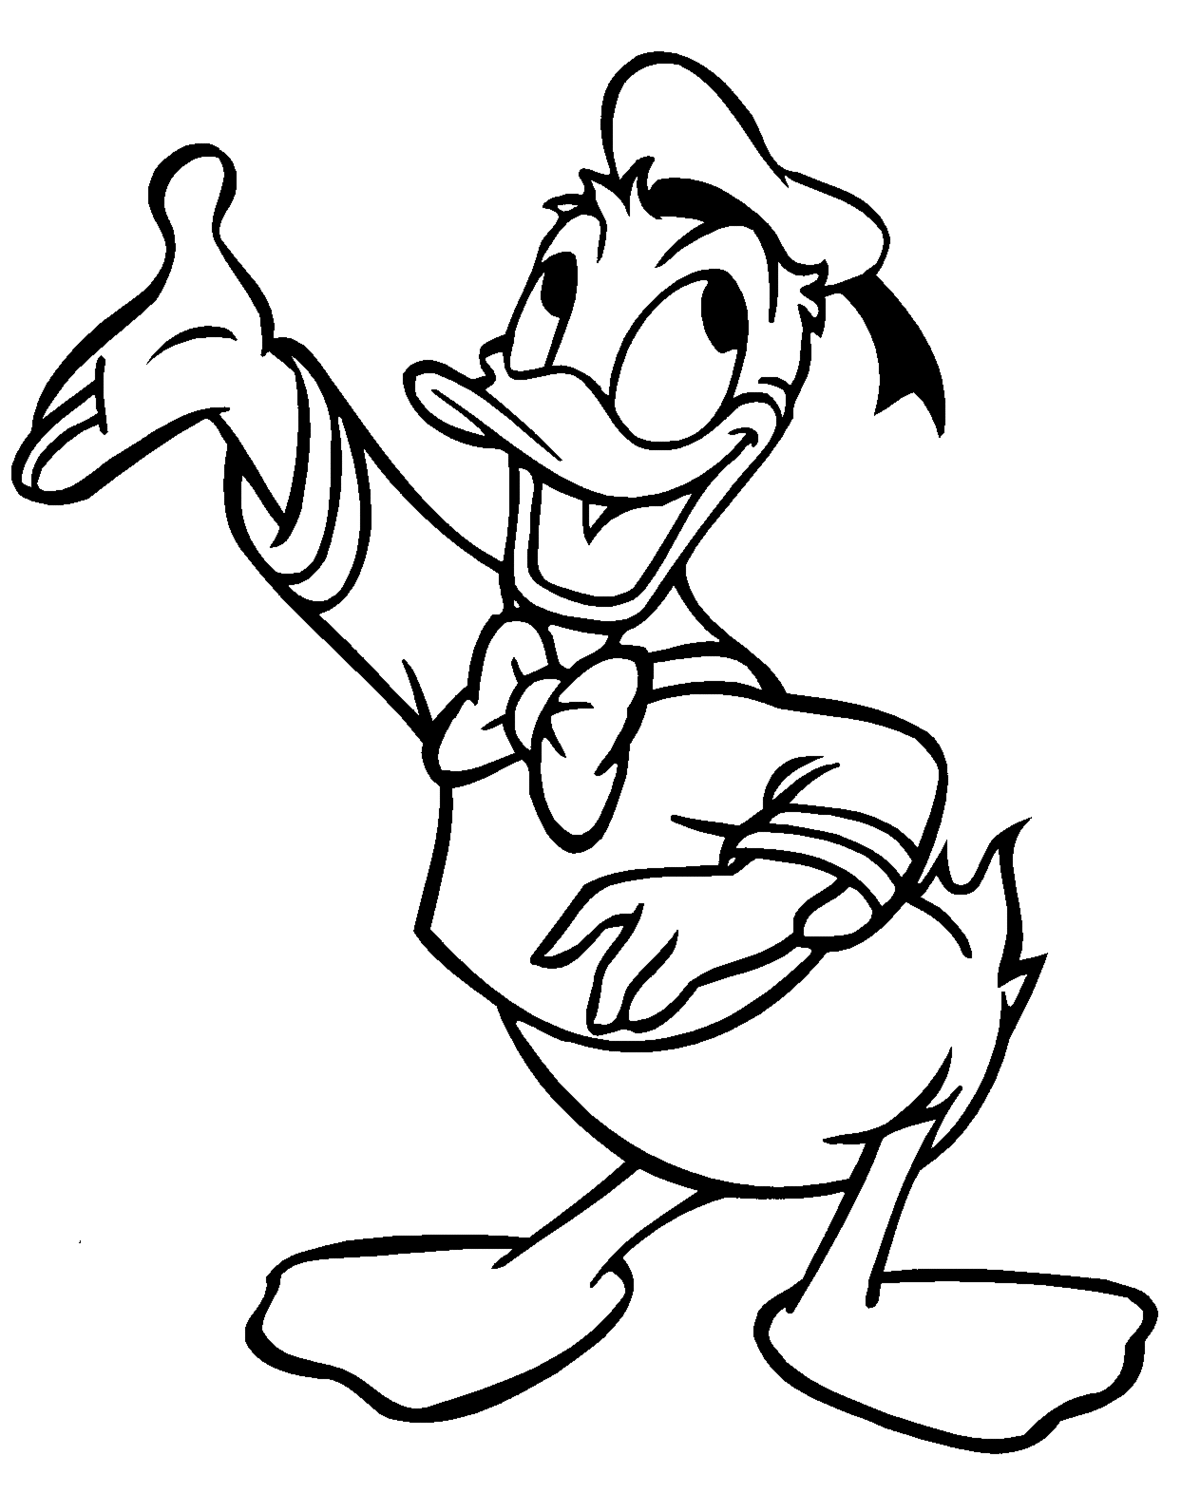 Line Drawing Of Donald Duck Clipart - Free to use Clip Art Resource